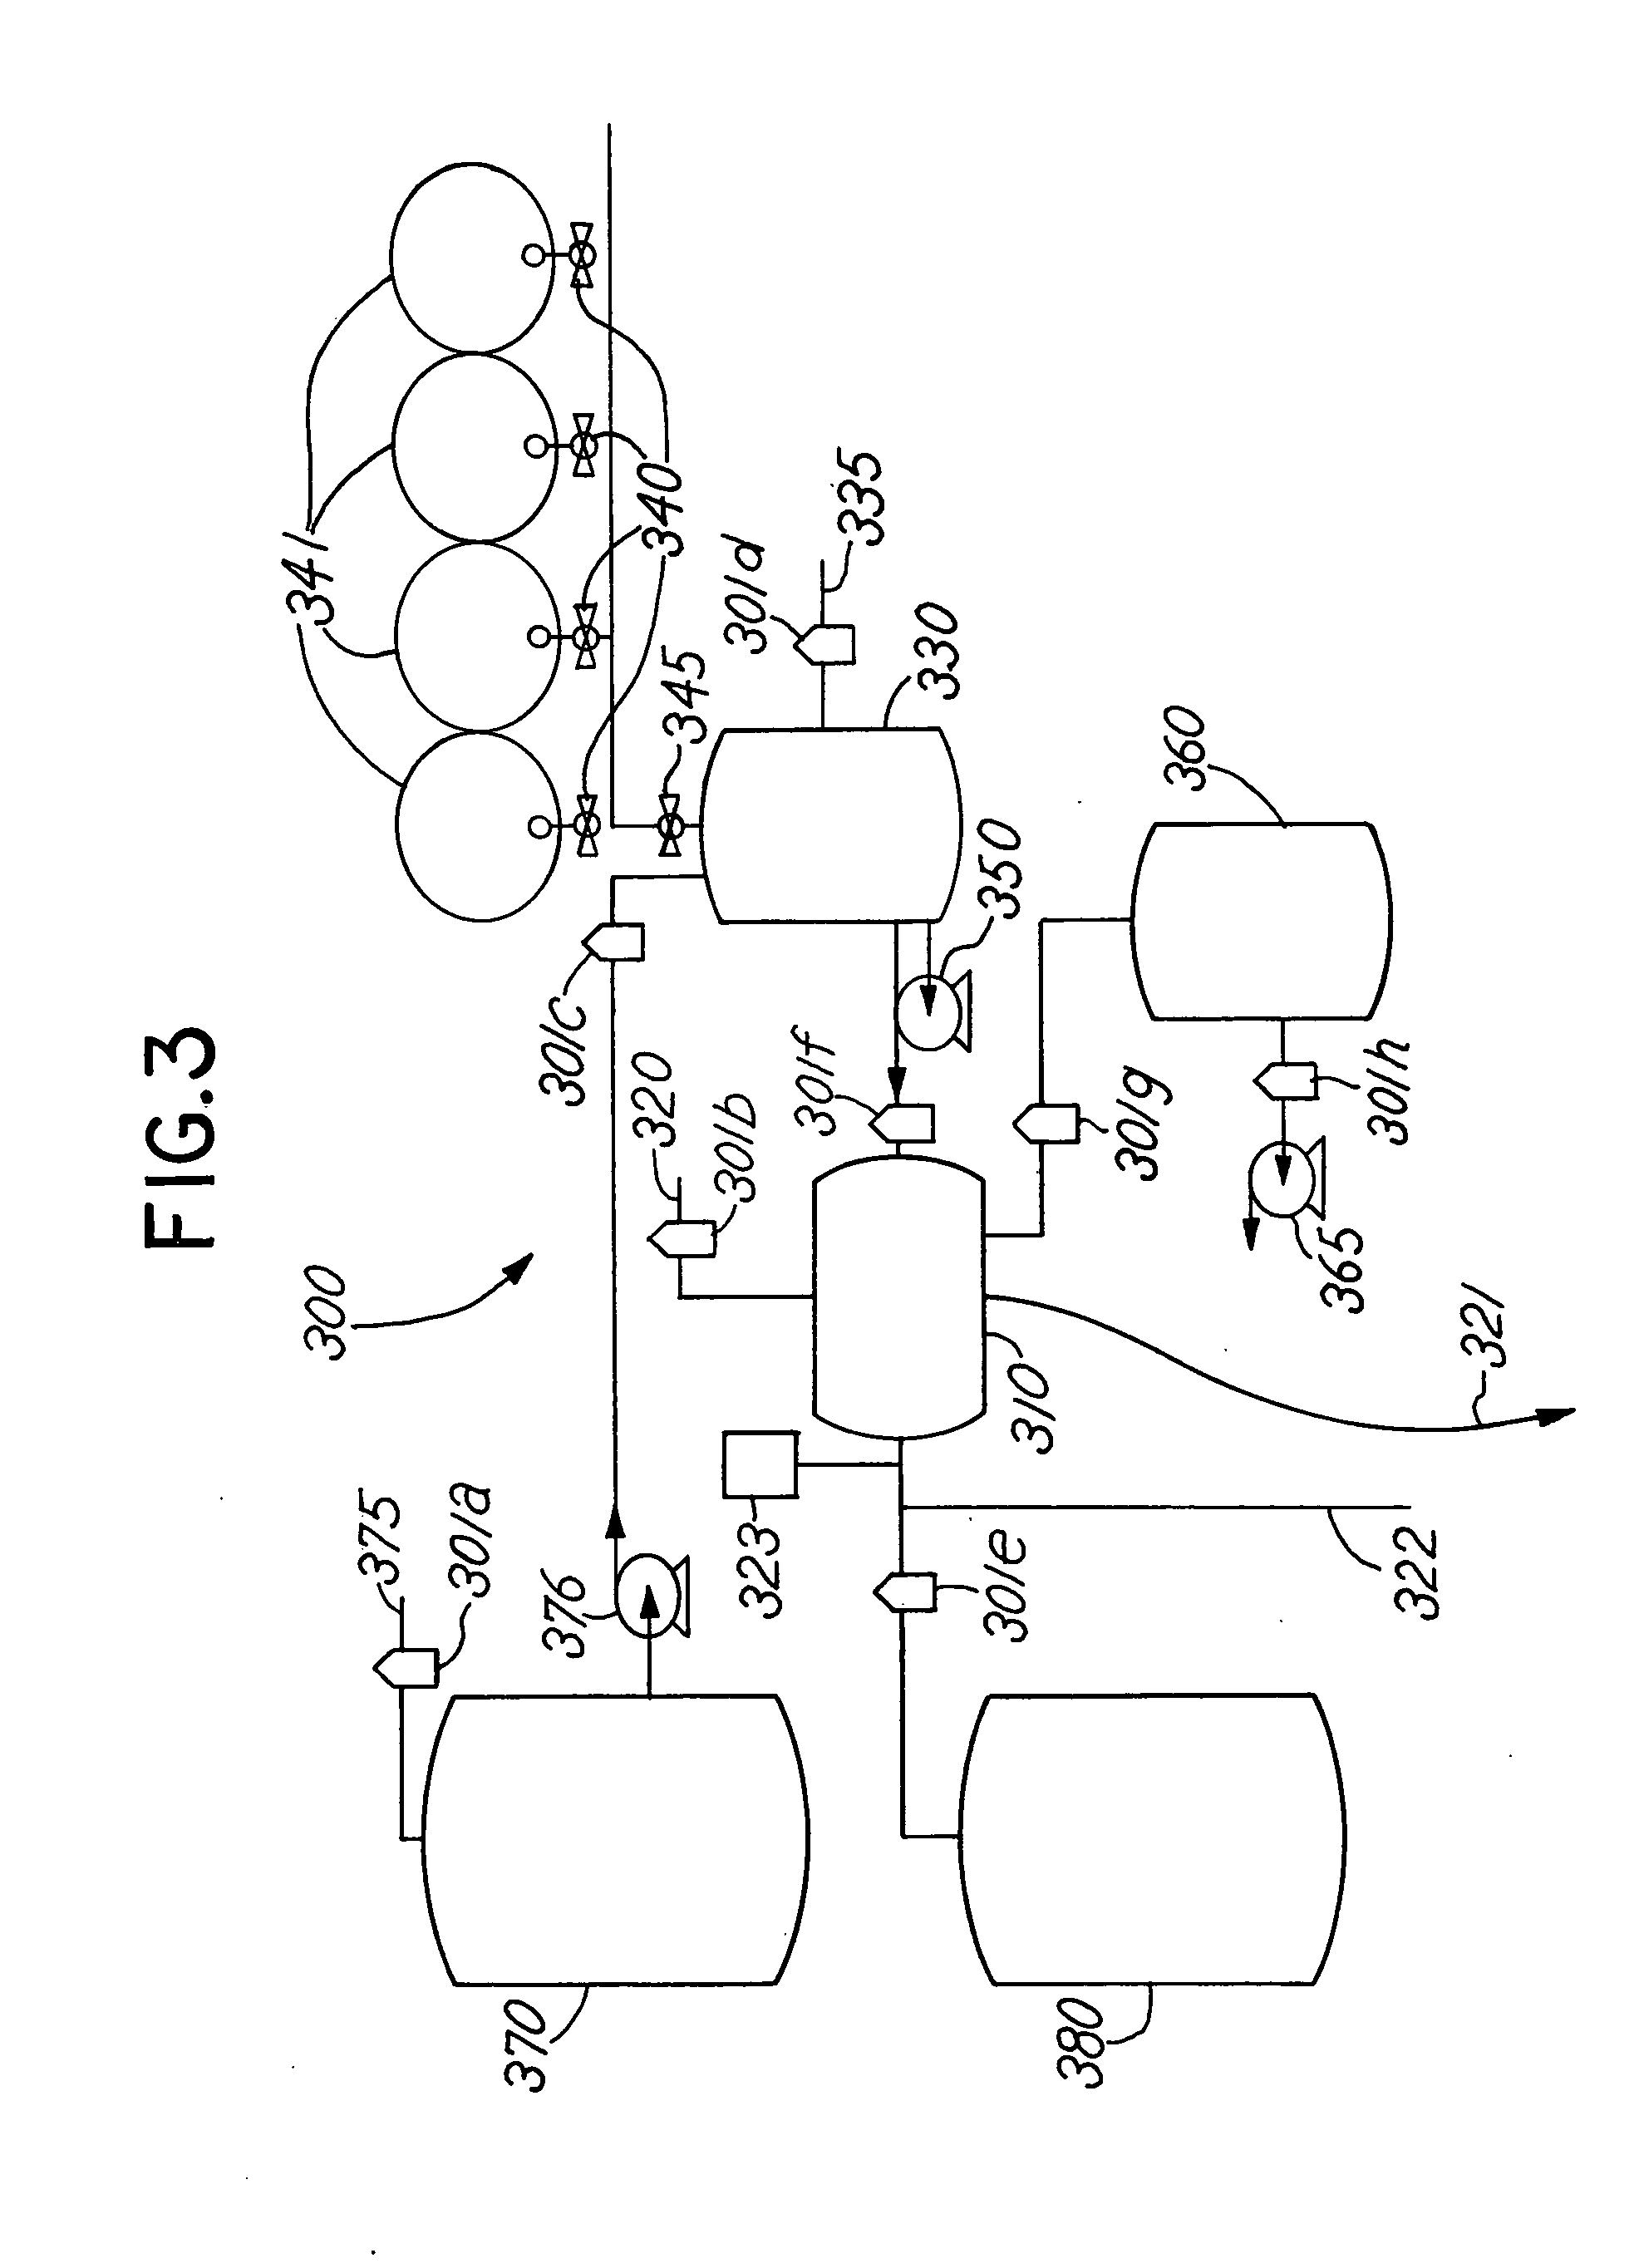 Process and apparatus for treating implants comprising soft tissue